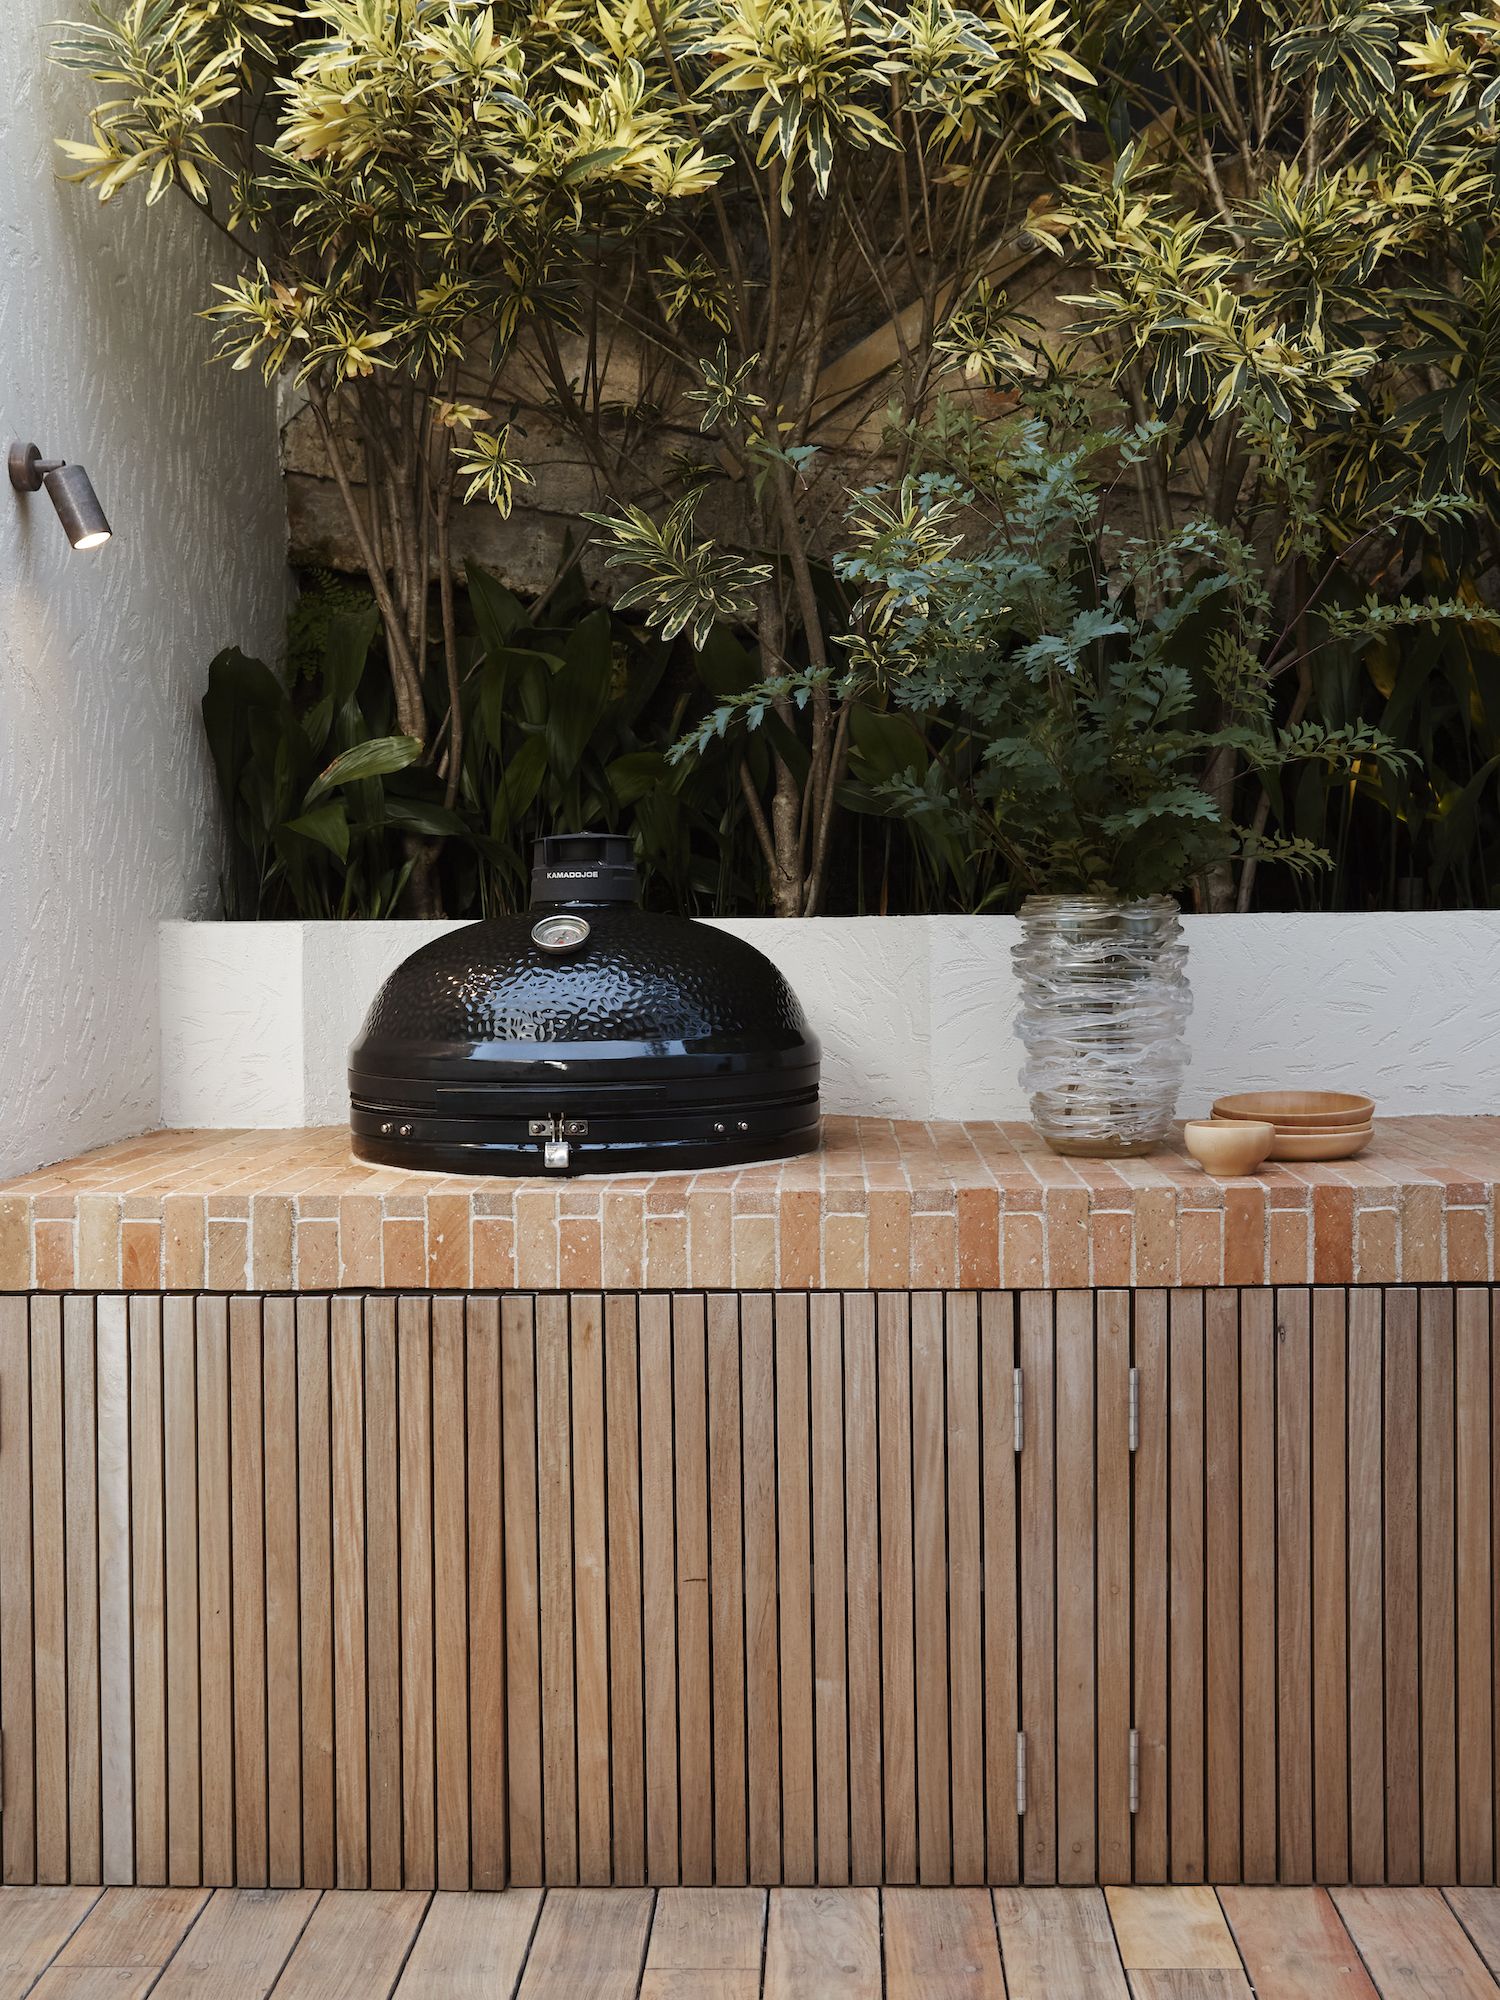 Creating the Perfect Outdoor Kitchen: A
Comprehensive Guide